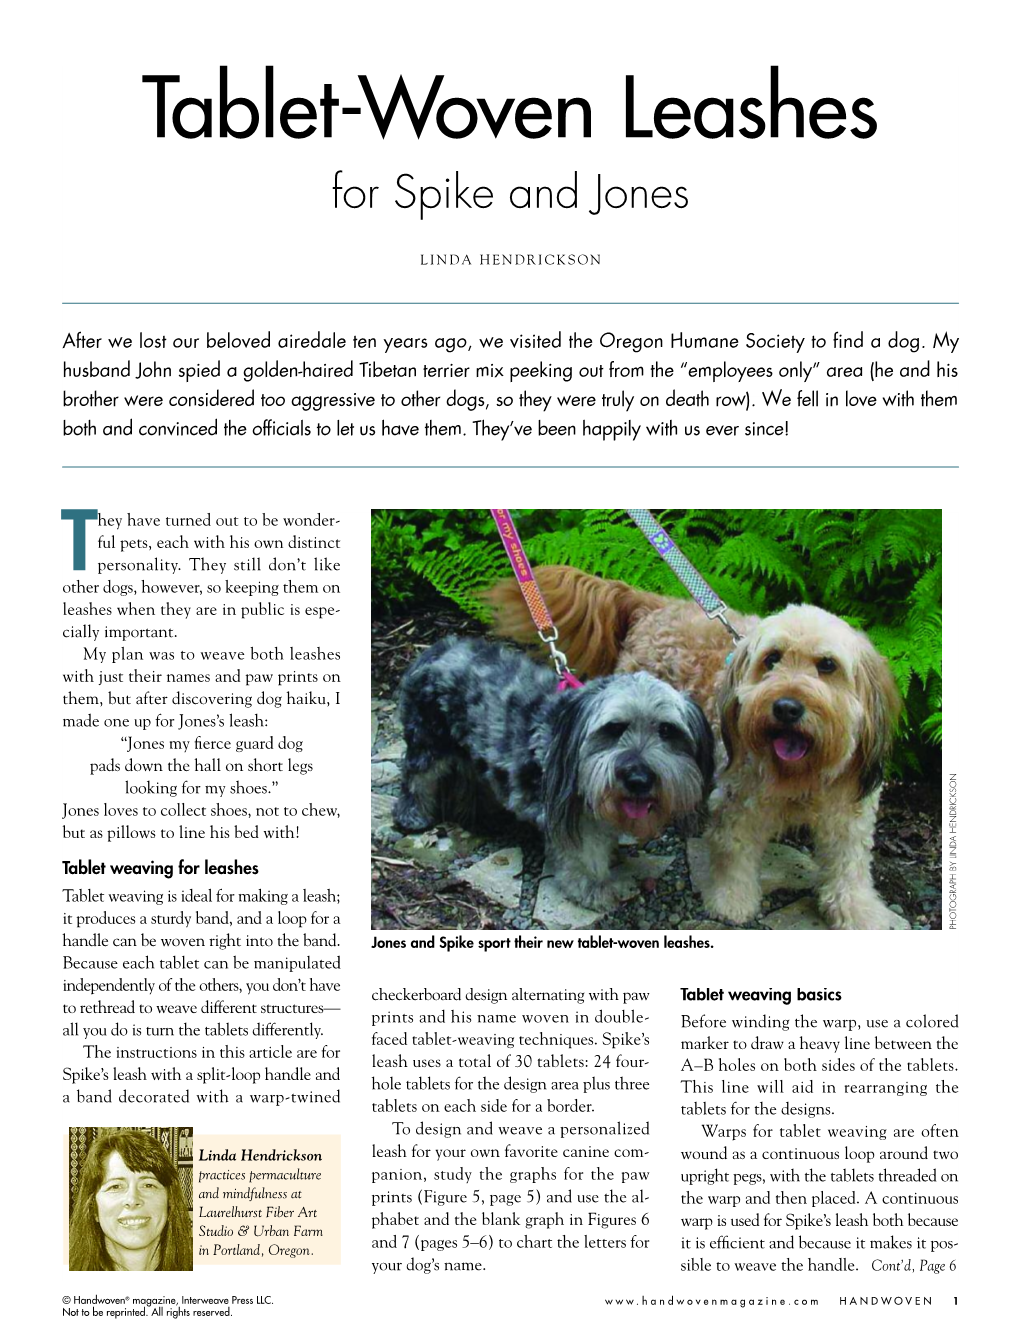 Tablet-Woven Leashes for Spike and Jones